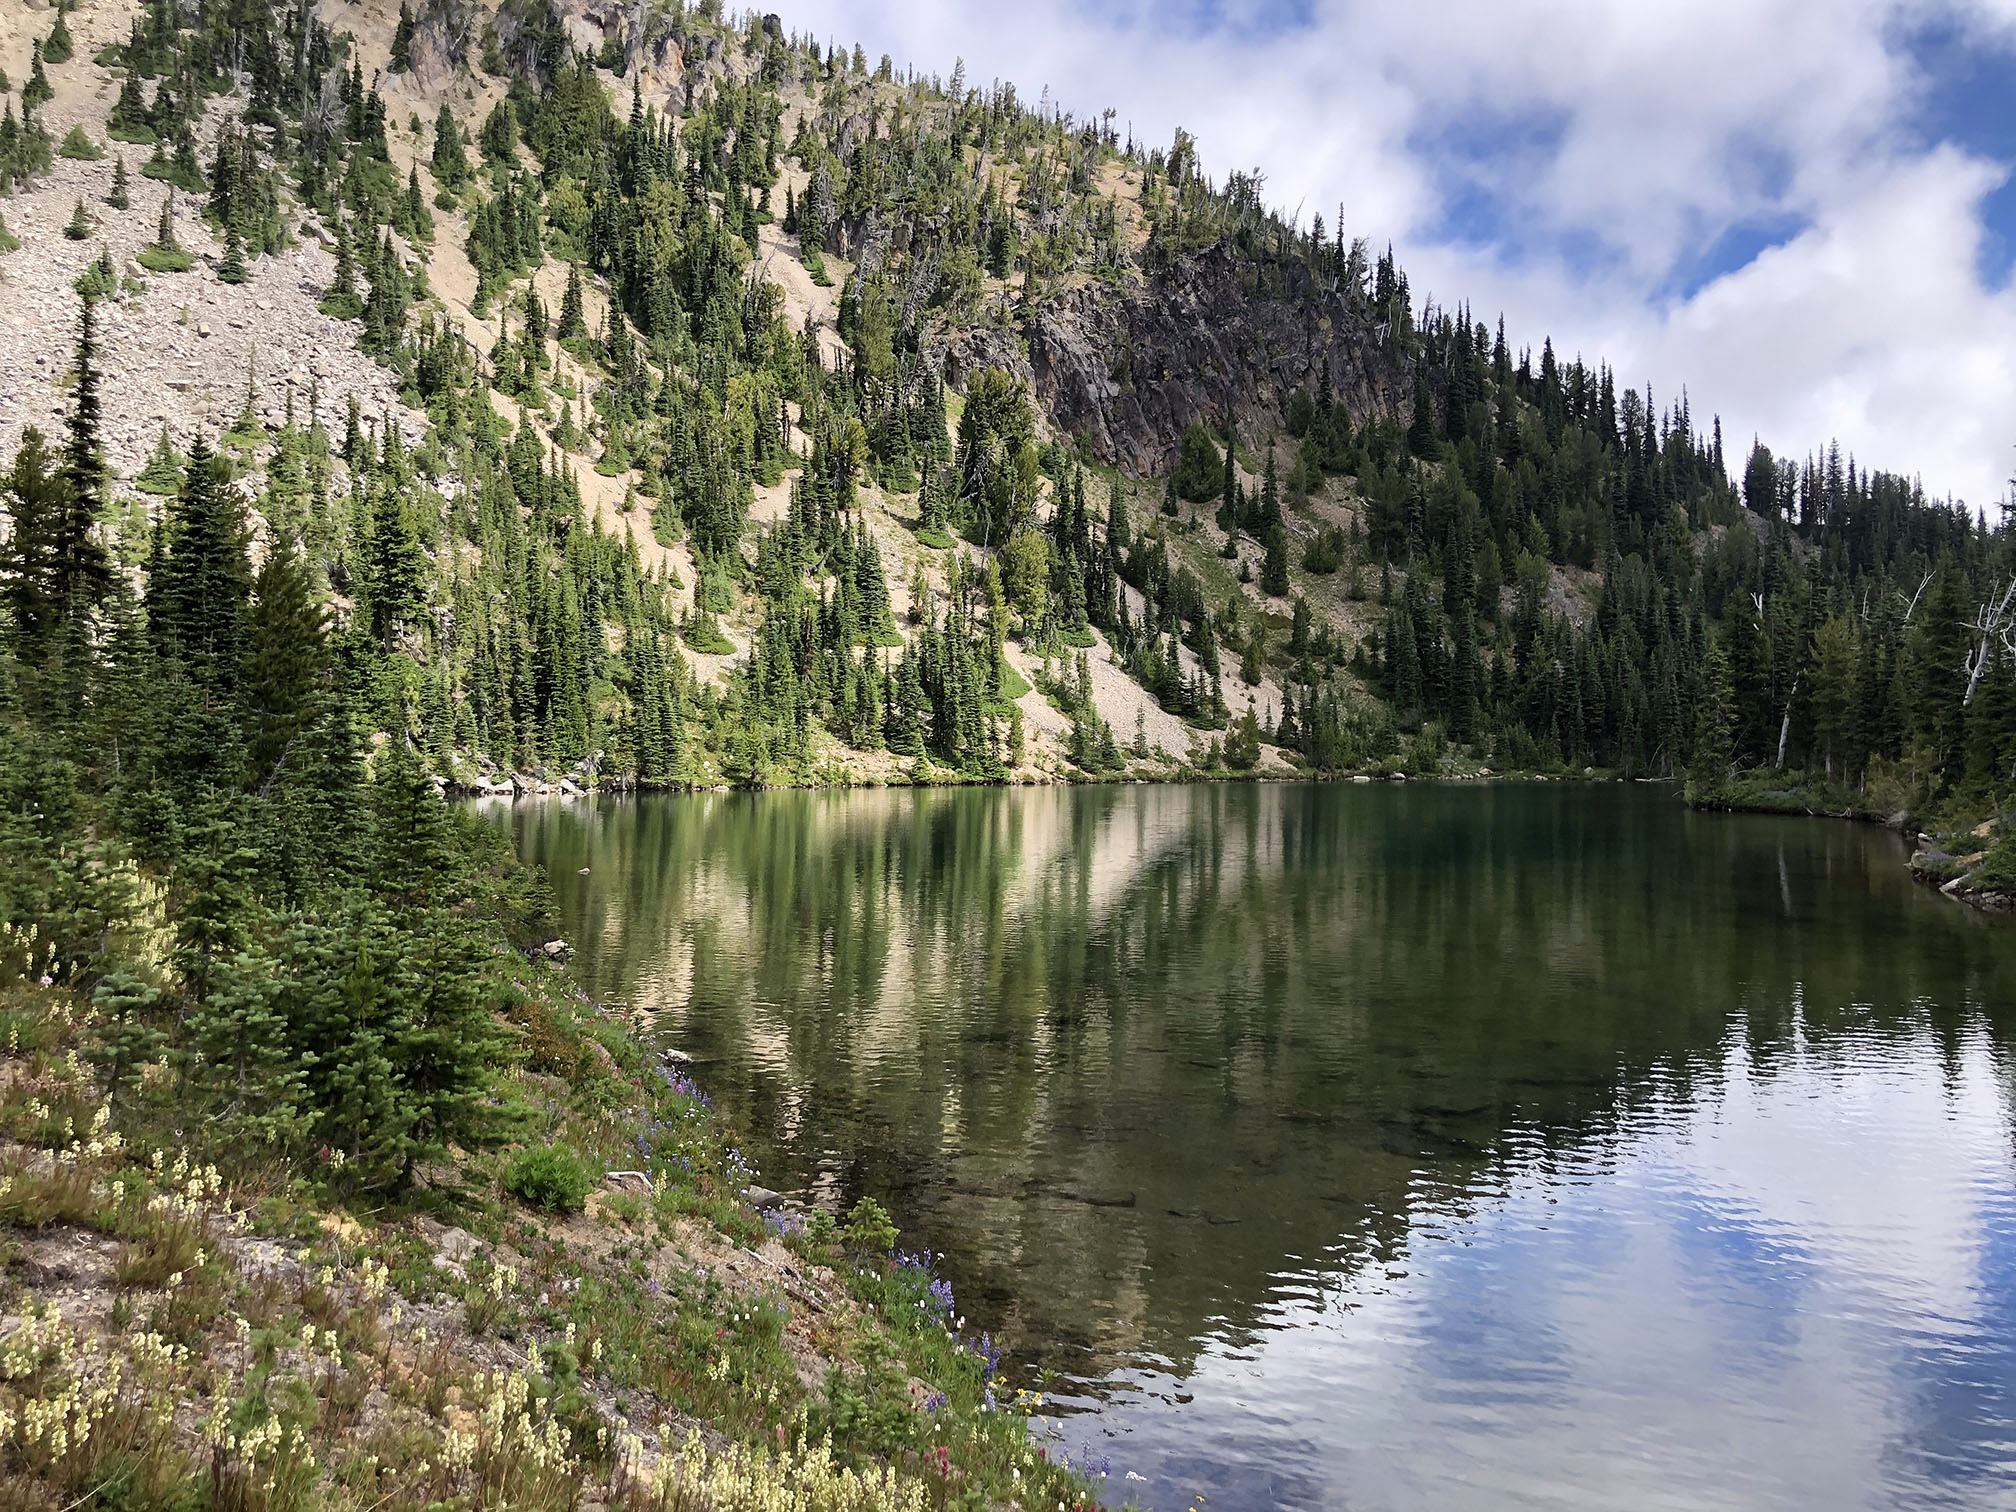 One of the lakes you see on the Palisades Lakes trail in Mt. Rainier National Park